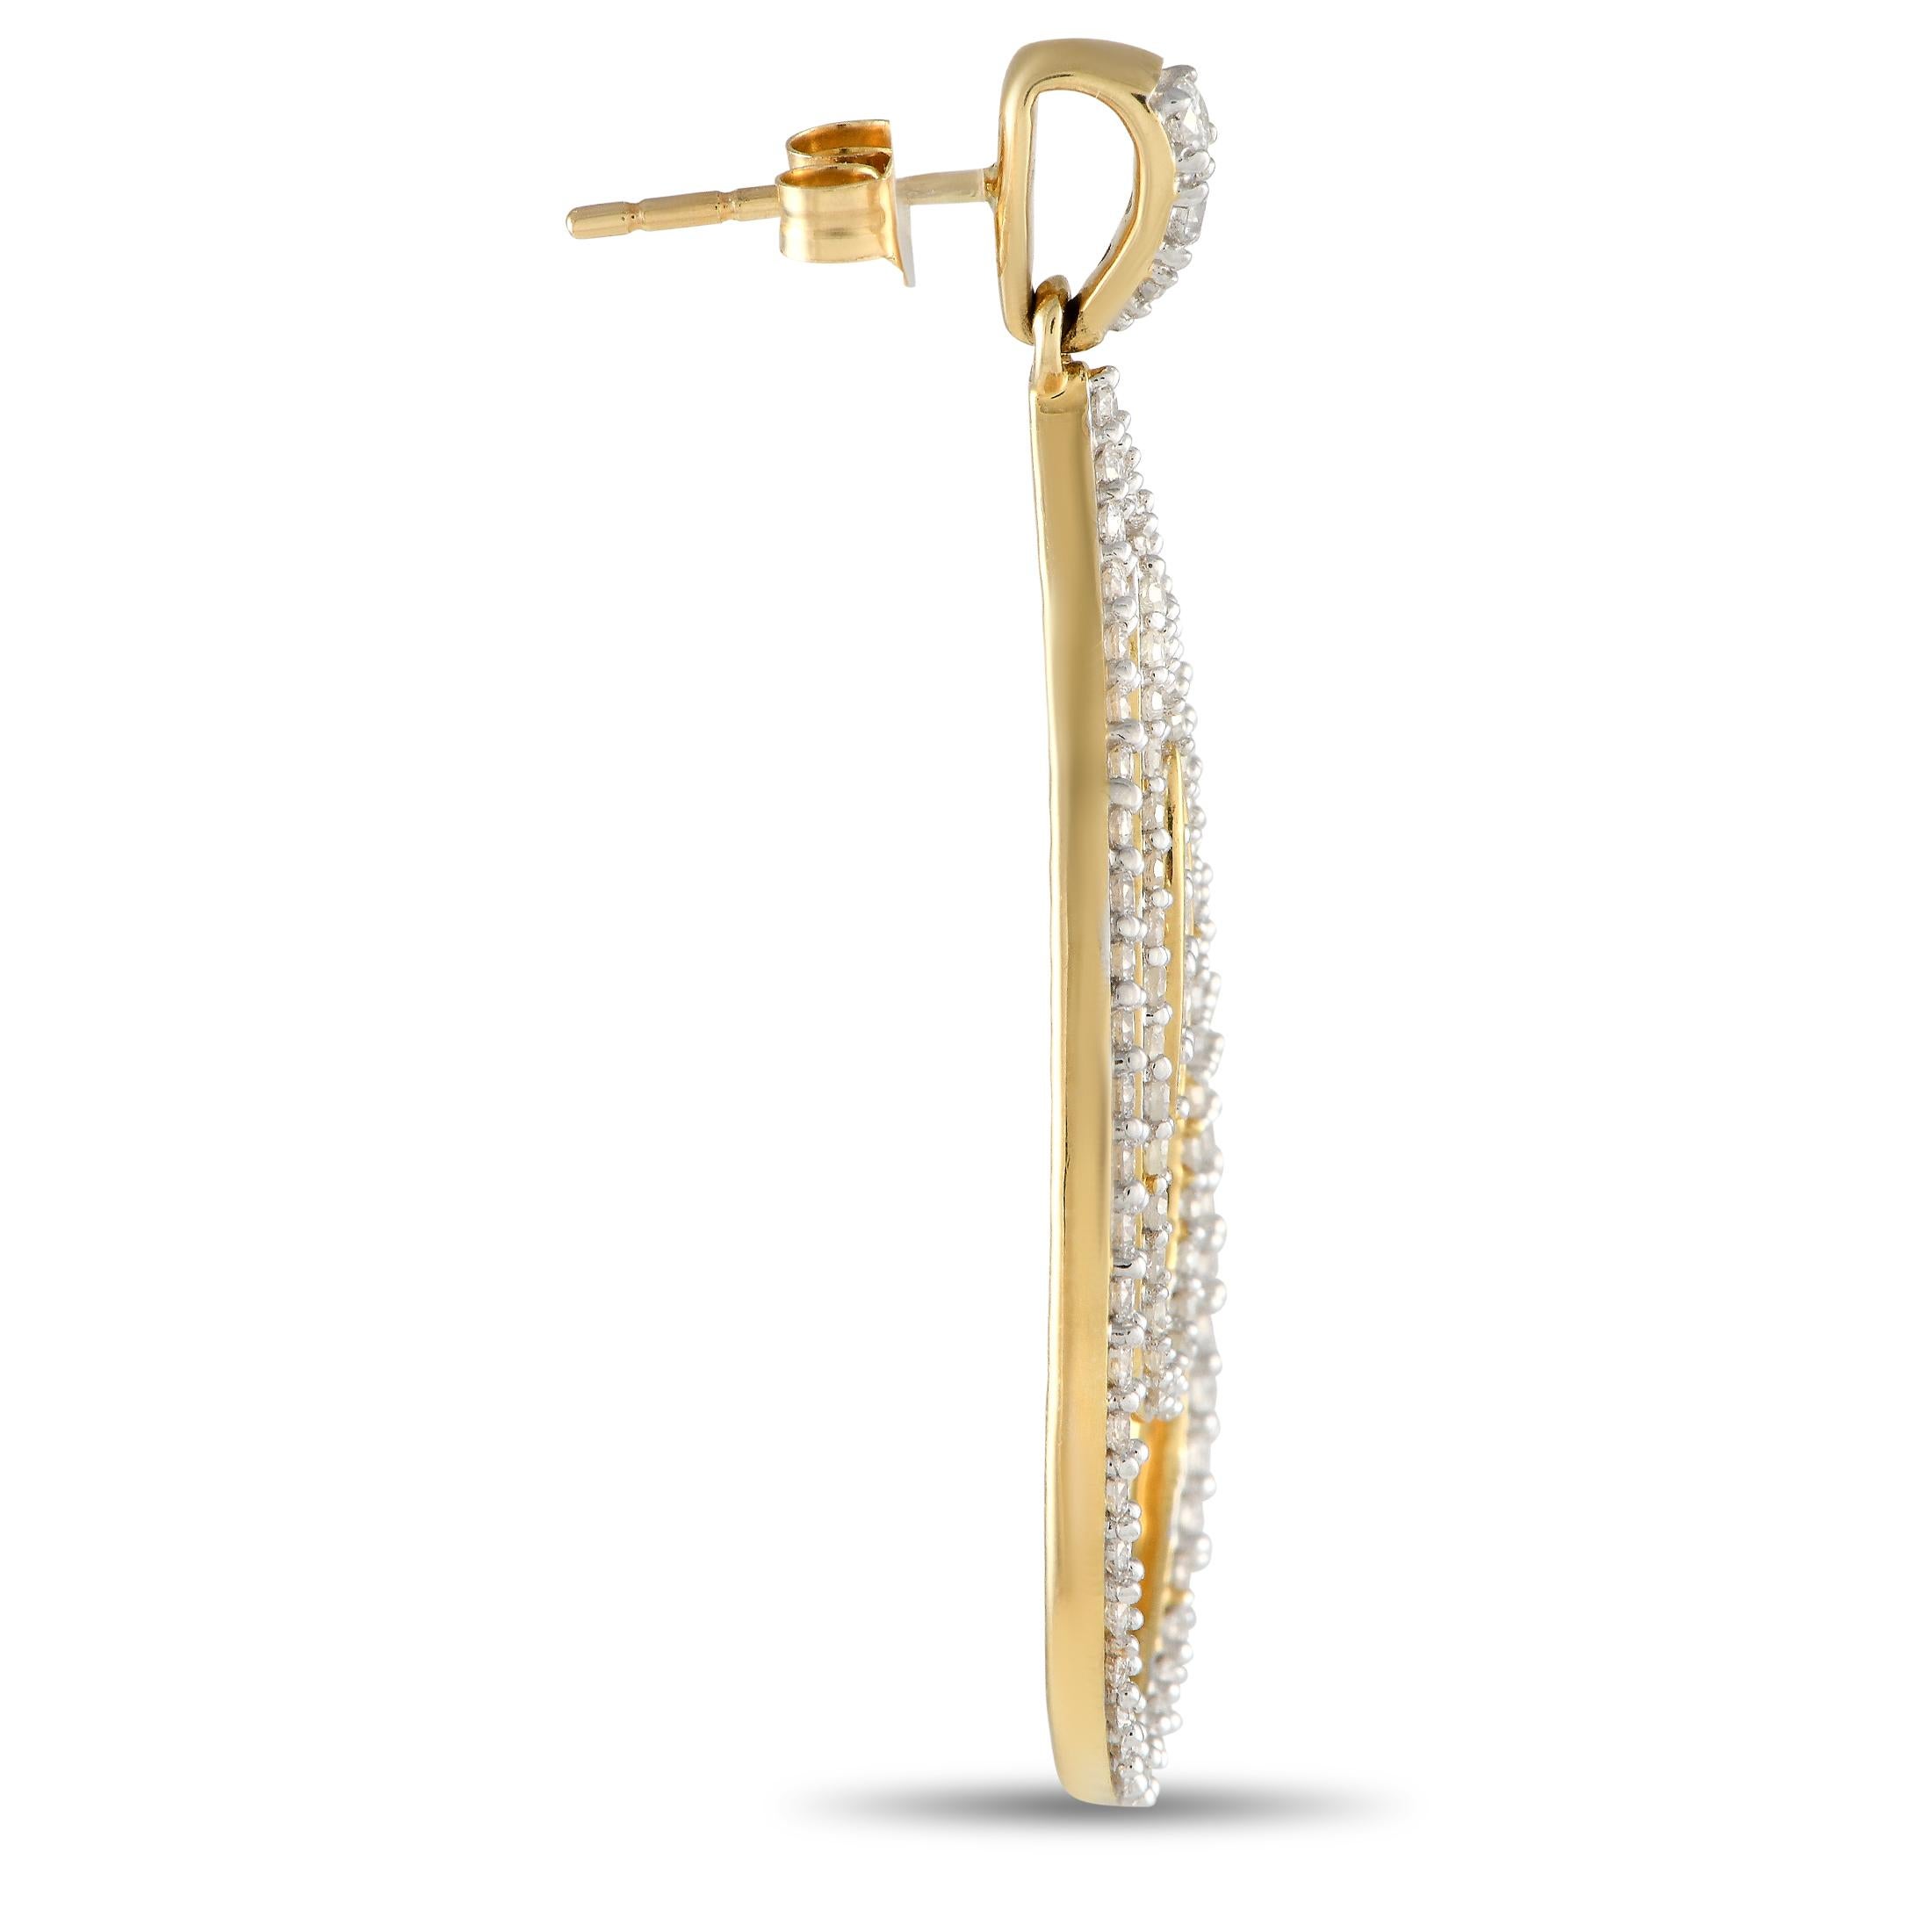 These earrings will instantly take any outfit up a notch. Crafted in 14K yellow gold, each earring measures 1.25 by 0.75 and features two teardrop-shaped hoops in a concentric pattern. Each pear-shaped outline is traced with sparkling diamonds. A